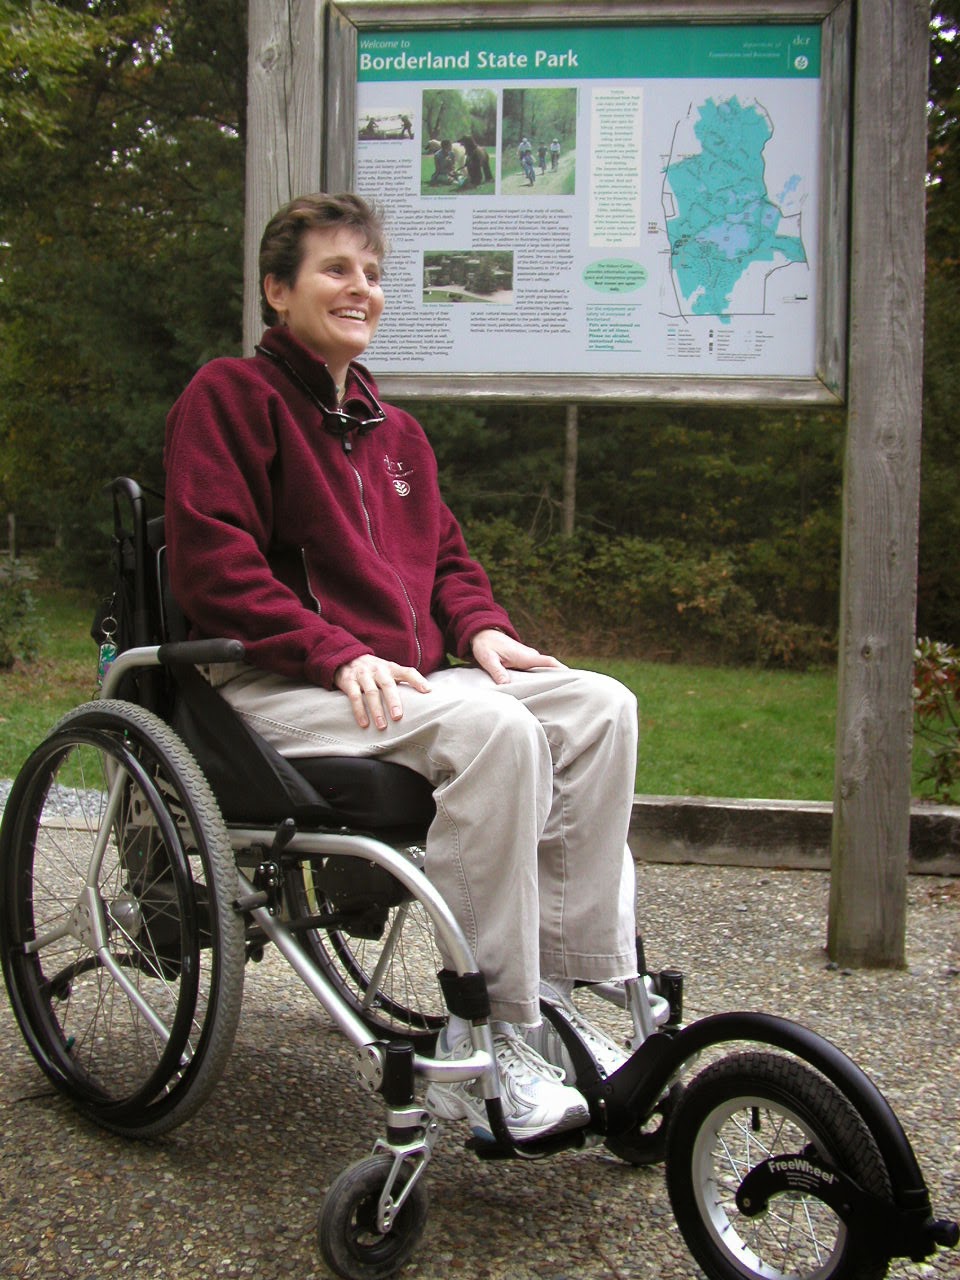 A woman sits in a wheelchair with a Freewheel attached on the front. A kiosk behind her reads Borderland State Park.